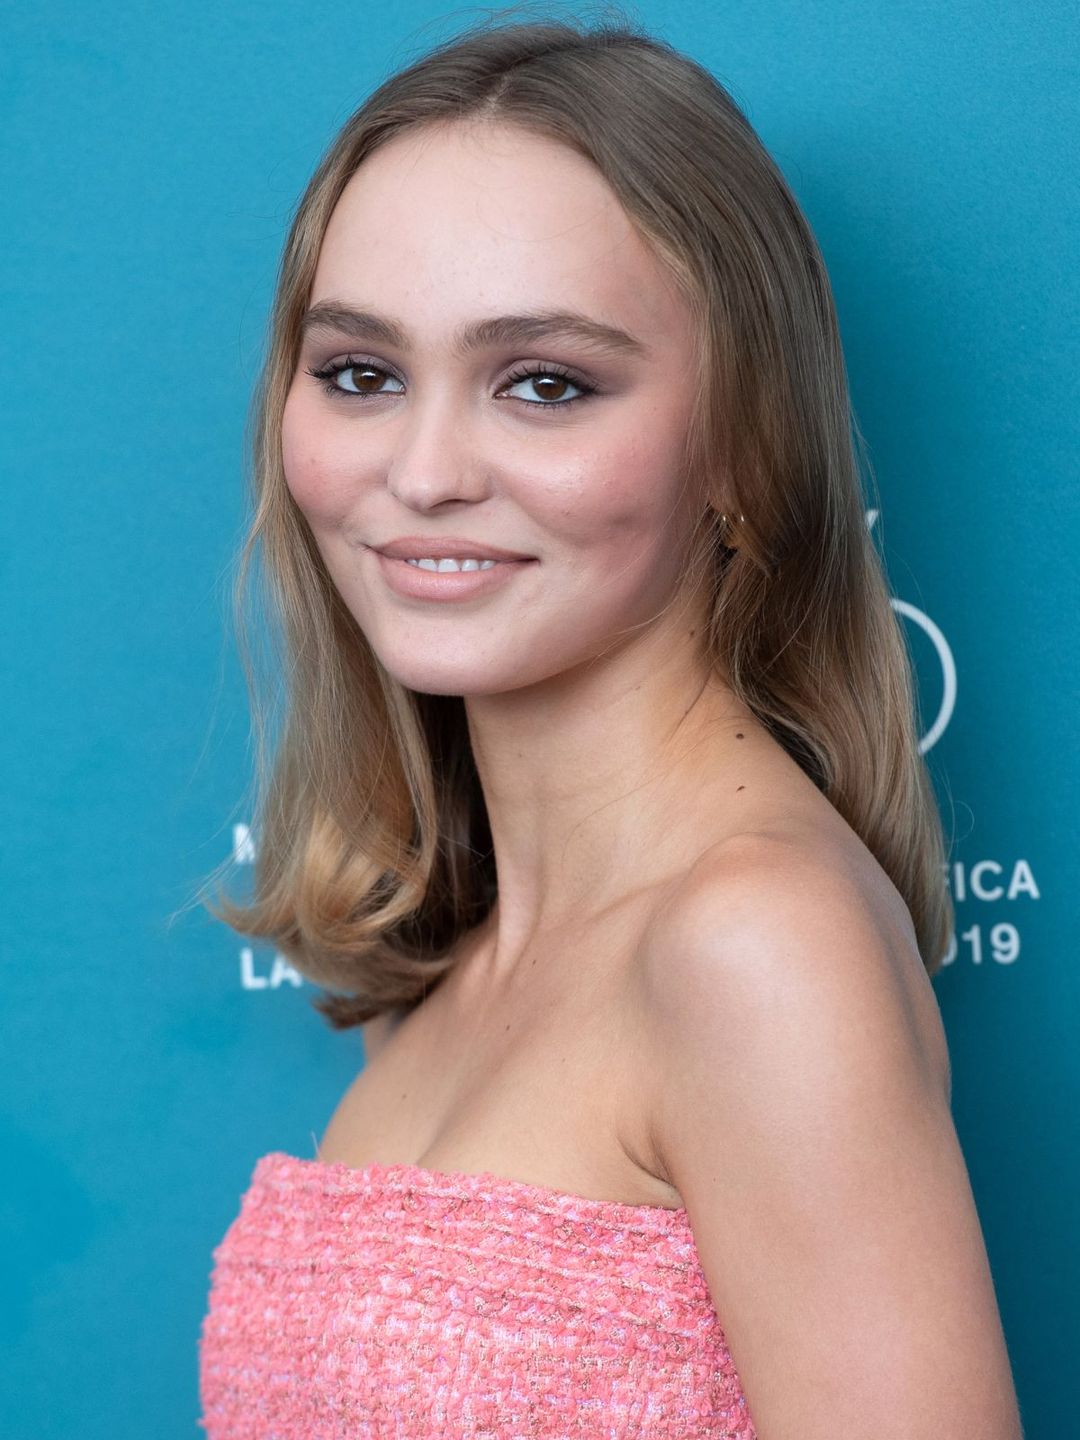 Lily-Rose Melody Depp unphotoshopped pictures